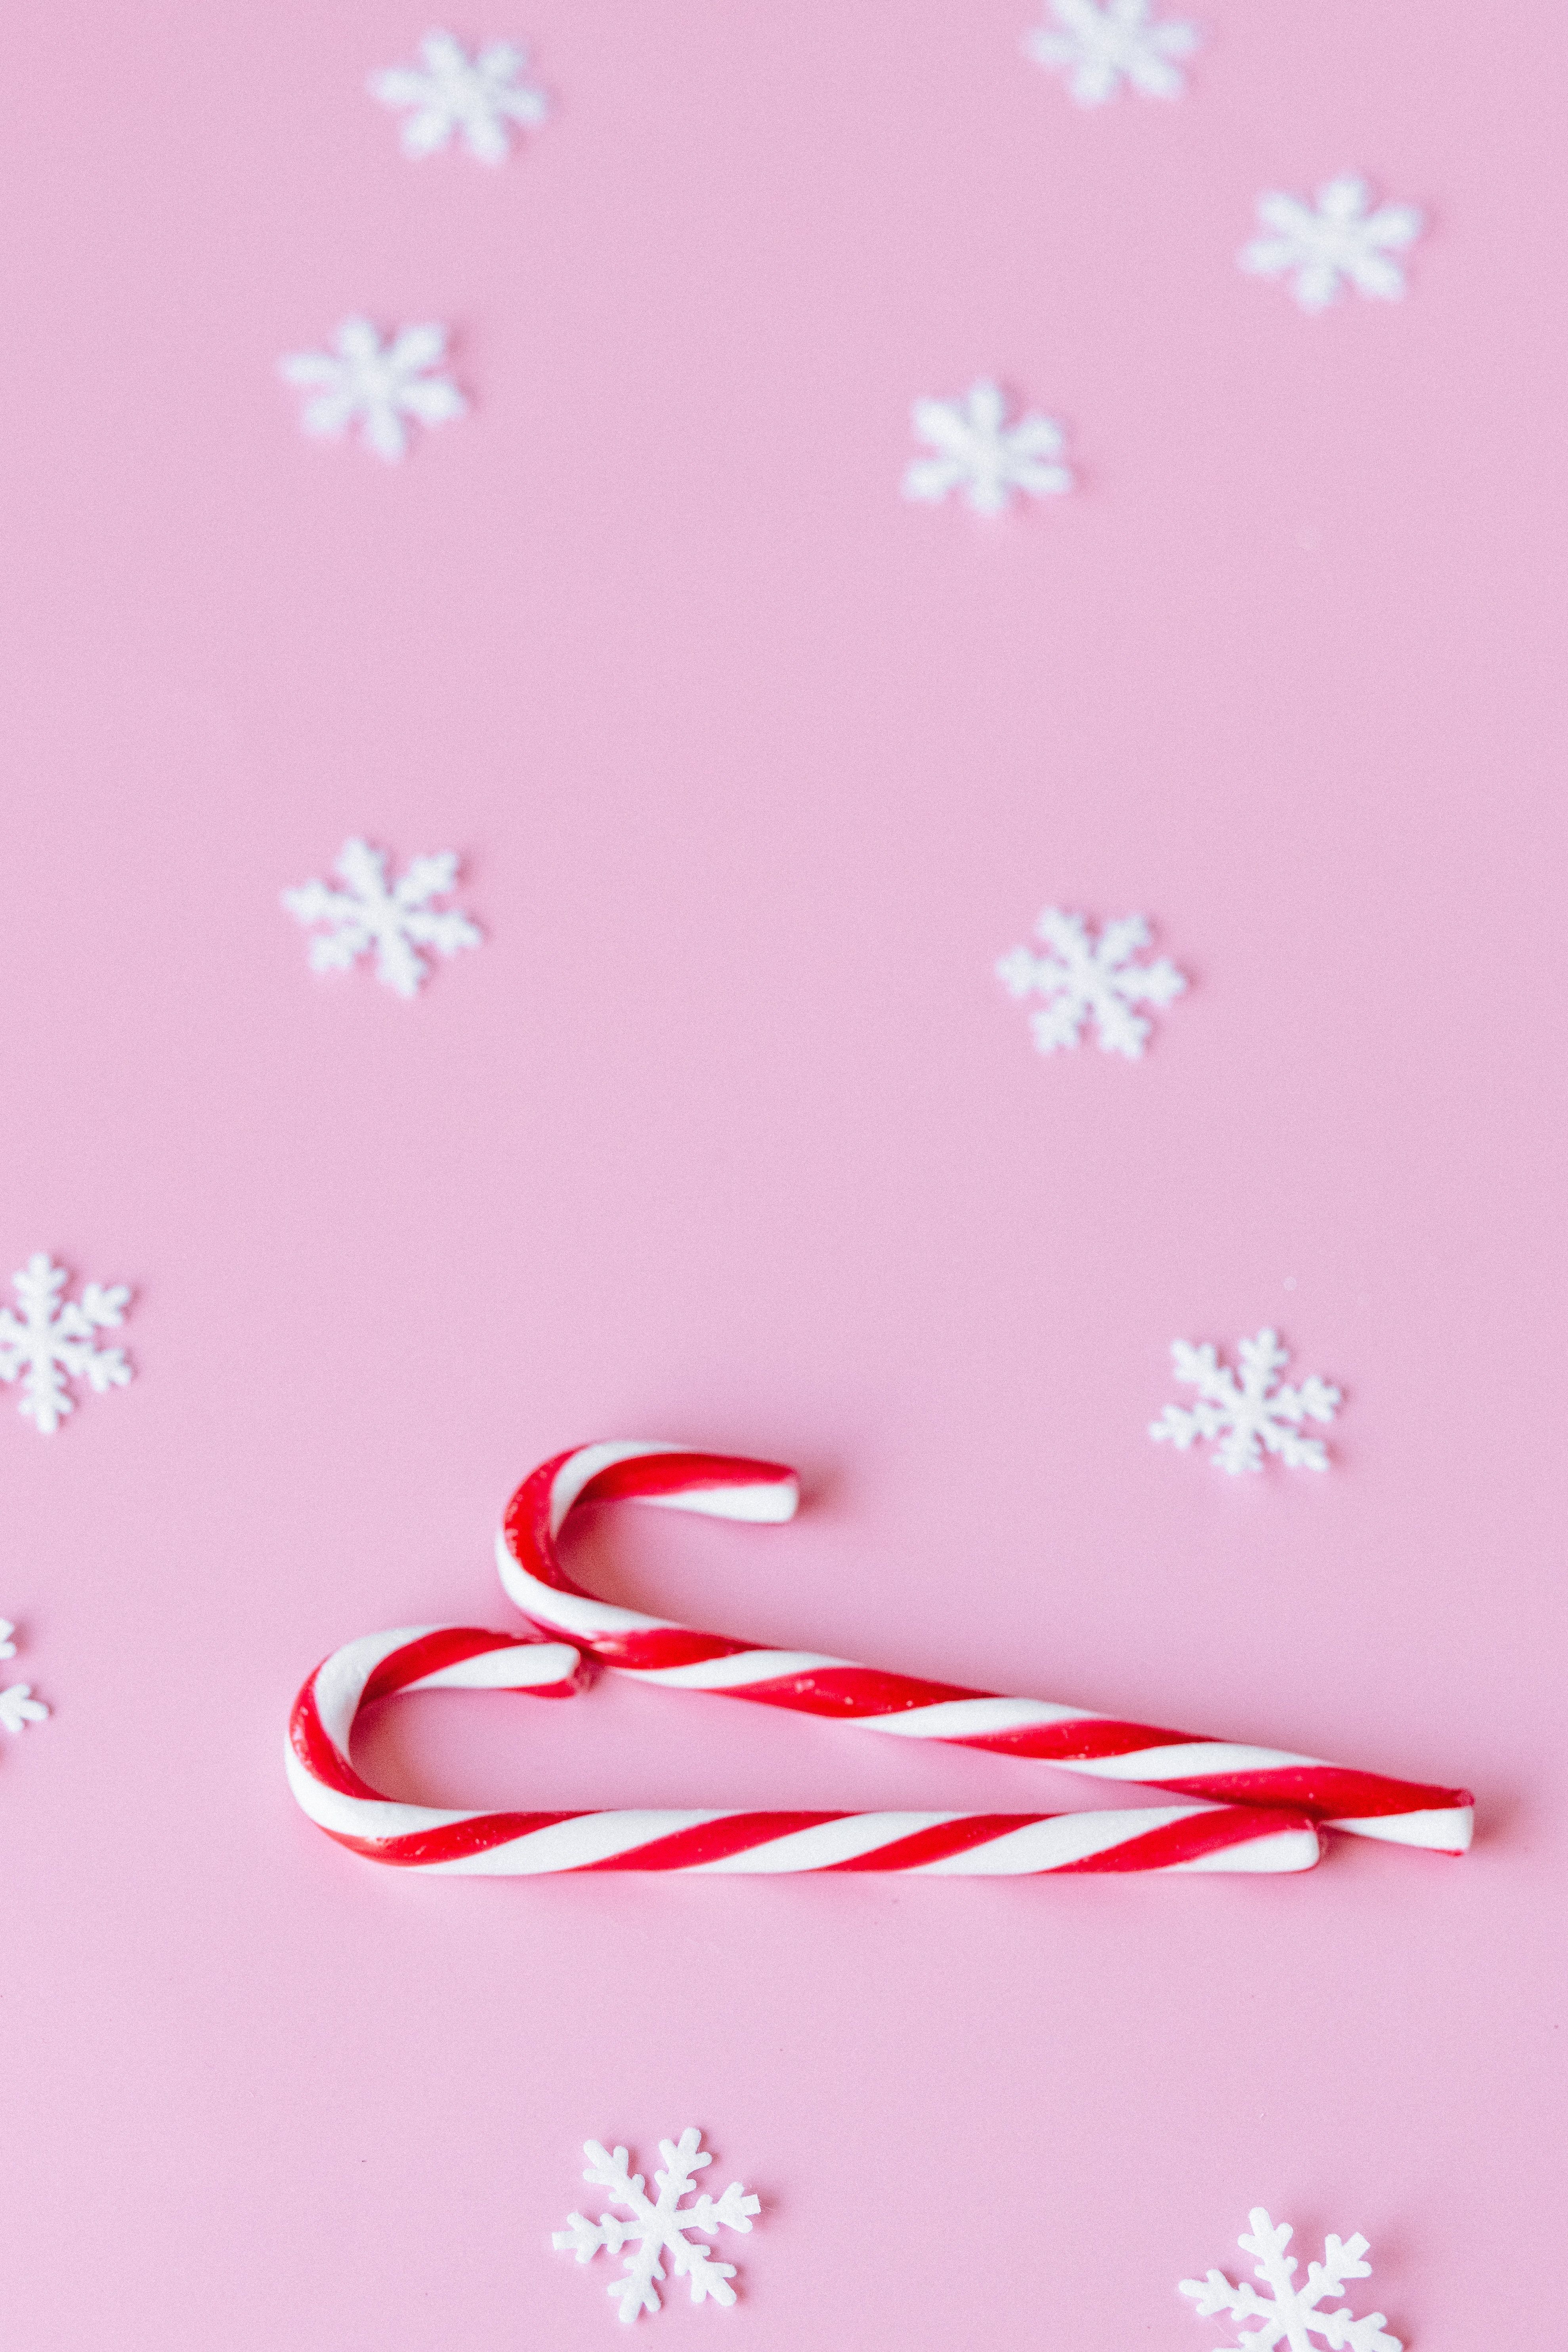 A pink background with candy canes and snowflakes. - Candy cane